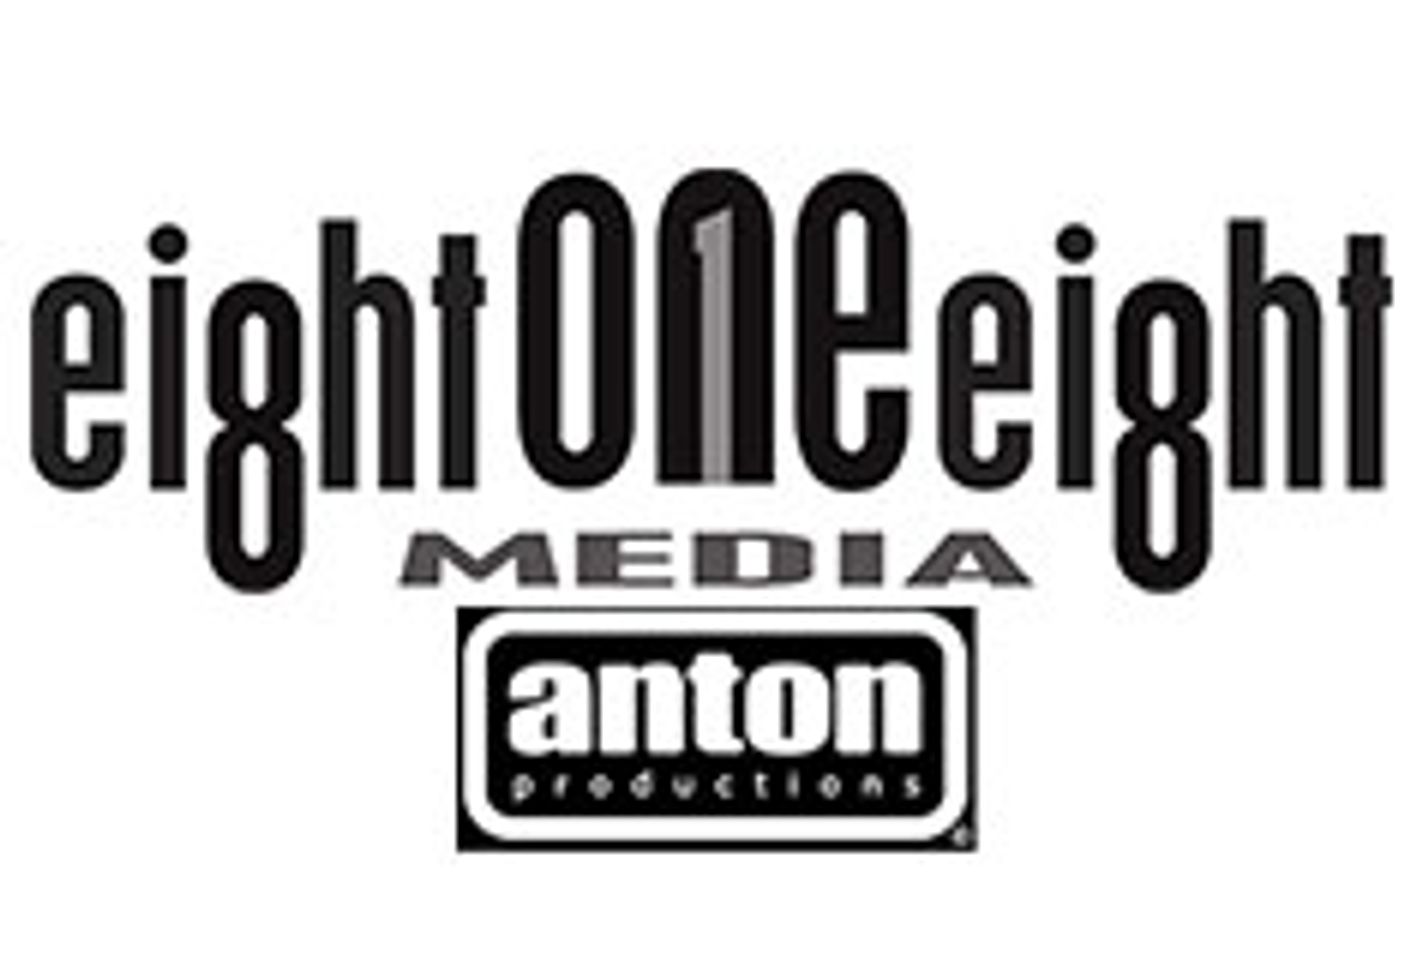 Anton Productions Launches Eight One Eight Media